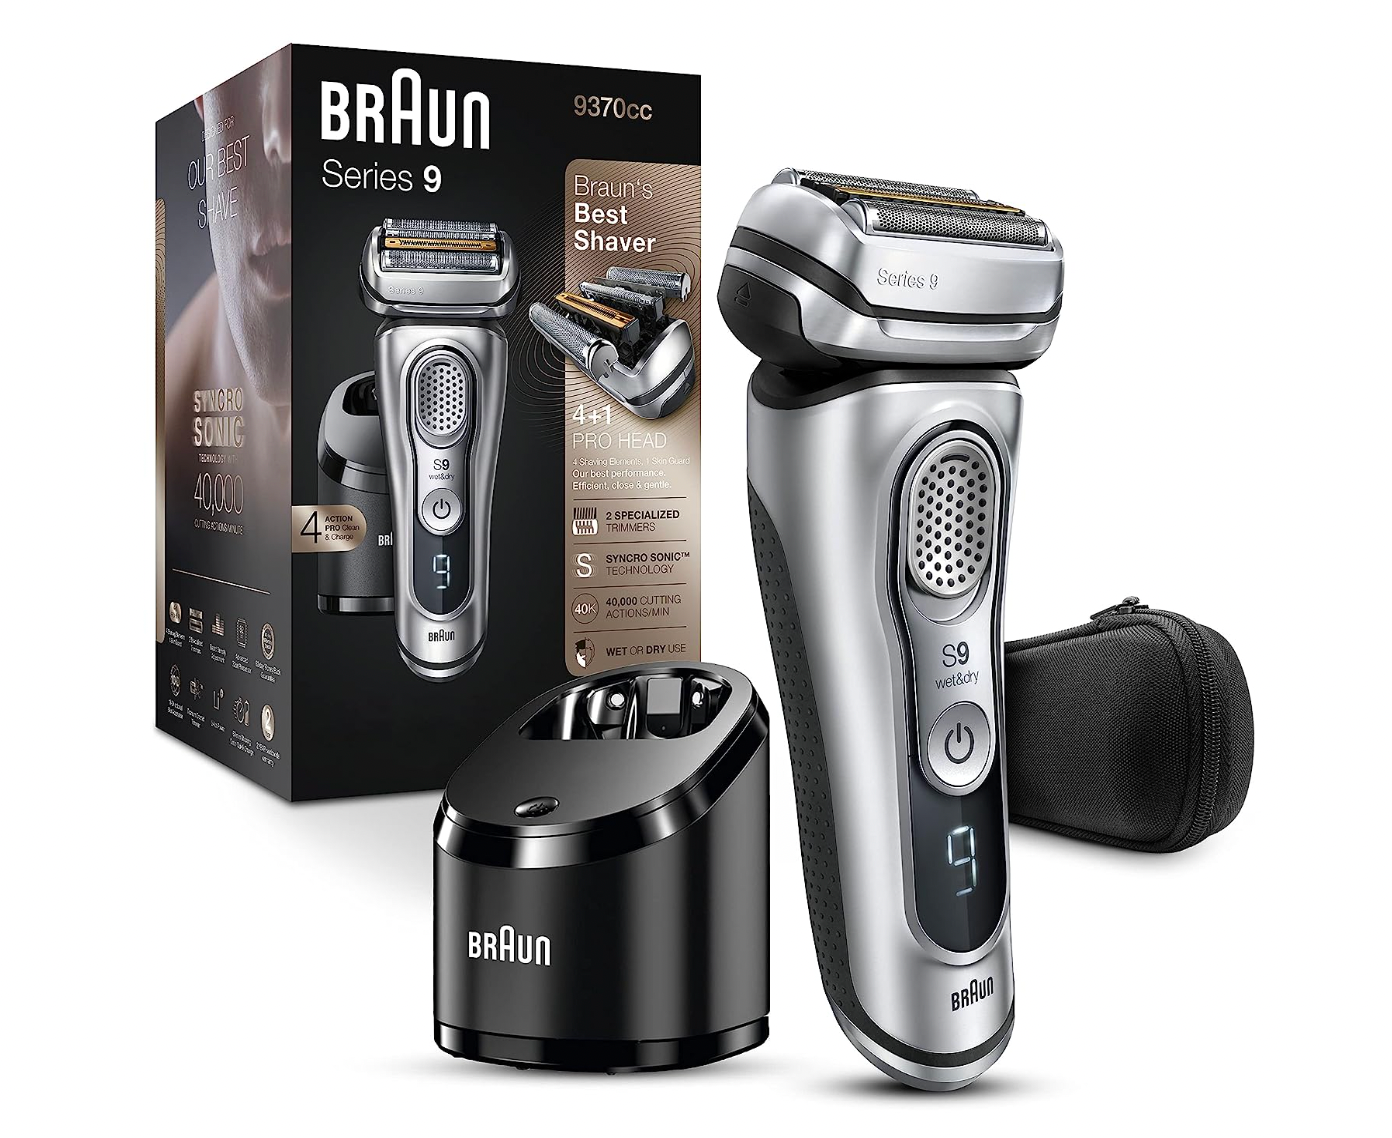 2. Braun Series 9 9370cc Rechargeable Wet & Dry Men's Electric Shaver